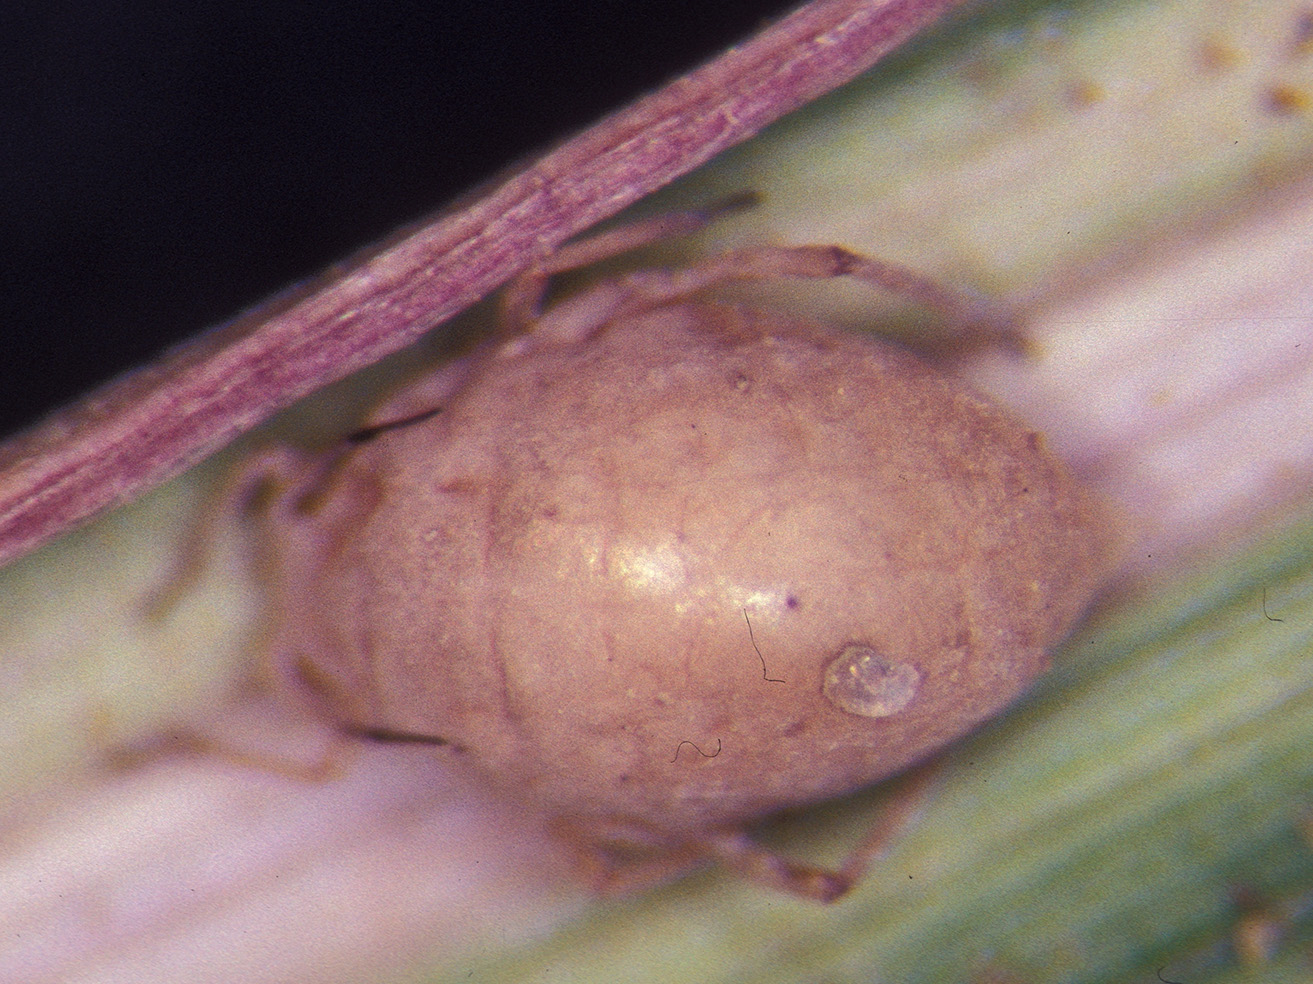 Fig. 10. Russian wheat aphid “mummy” attacked by a parasitoid wasp.